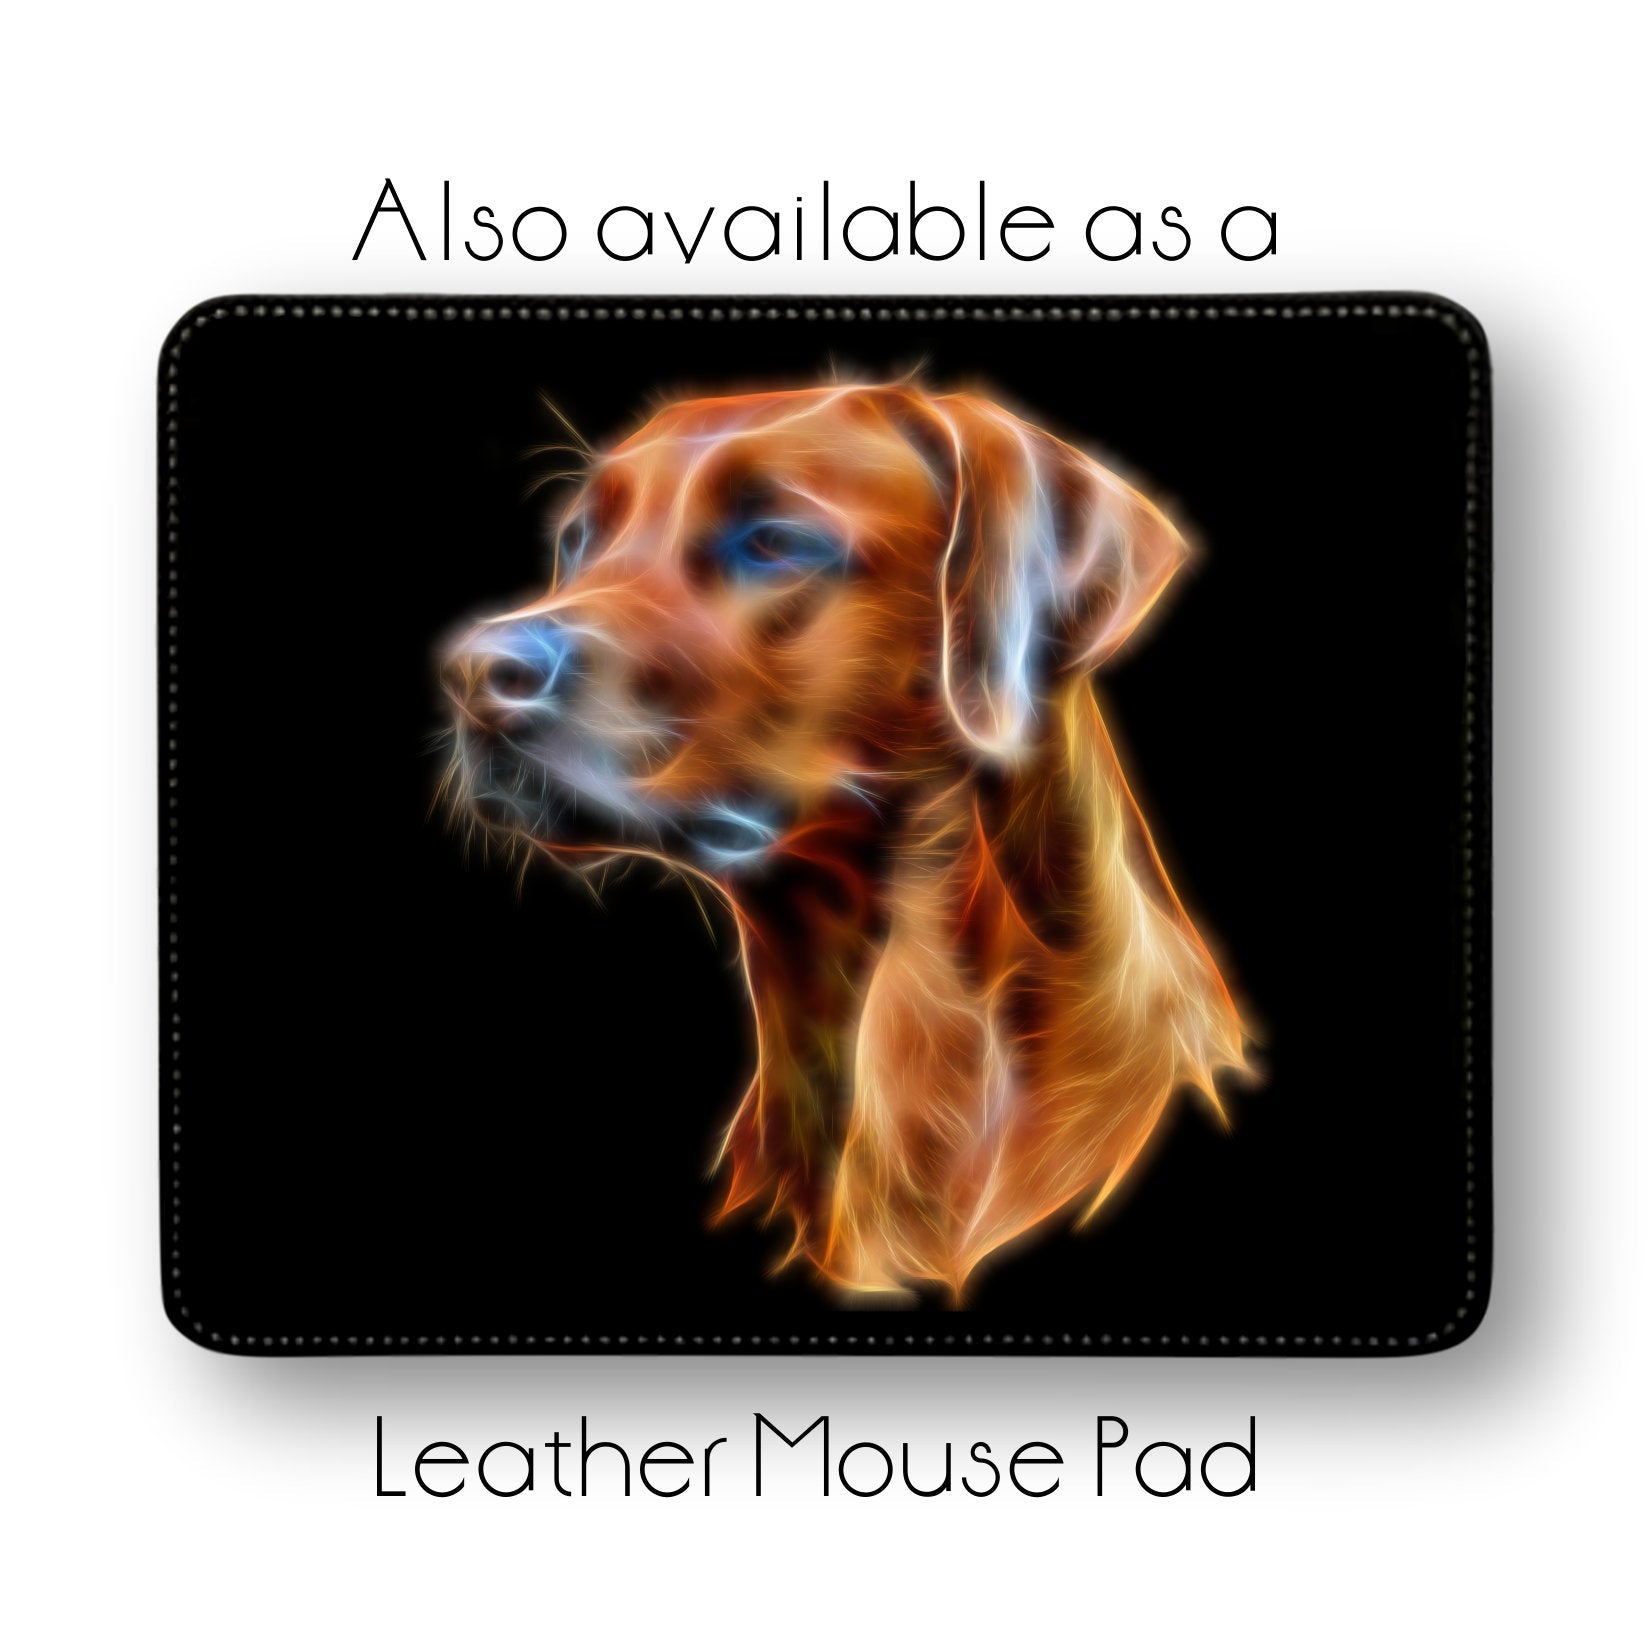 Rhodesian Ridgeback Metal Wall Plaque with Stunning Fractal Art Design. Also available as Mouse Pad, Keychain or Coaster.